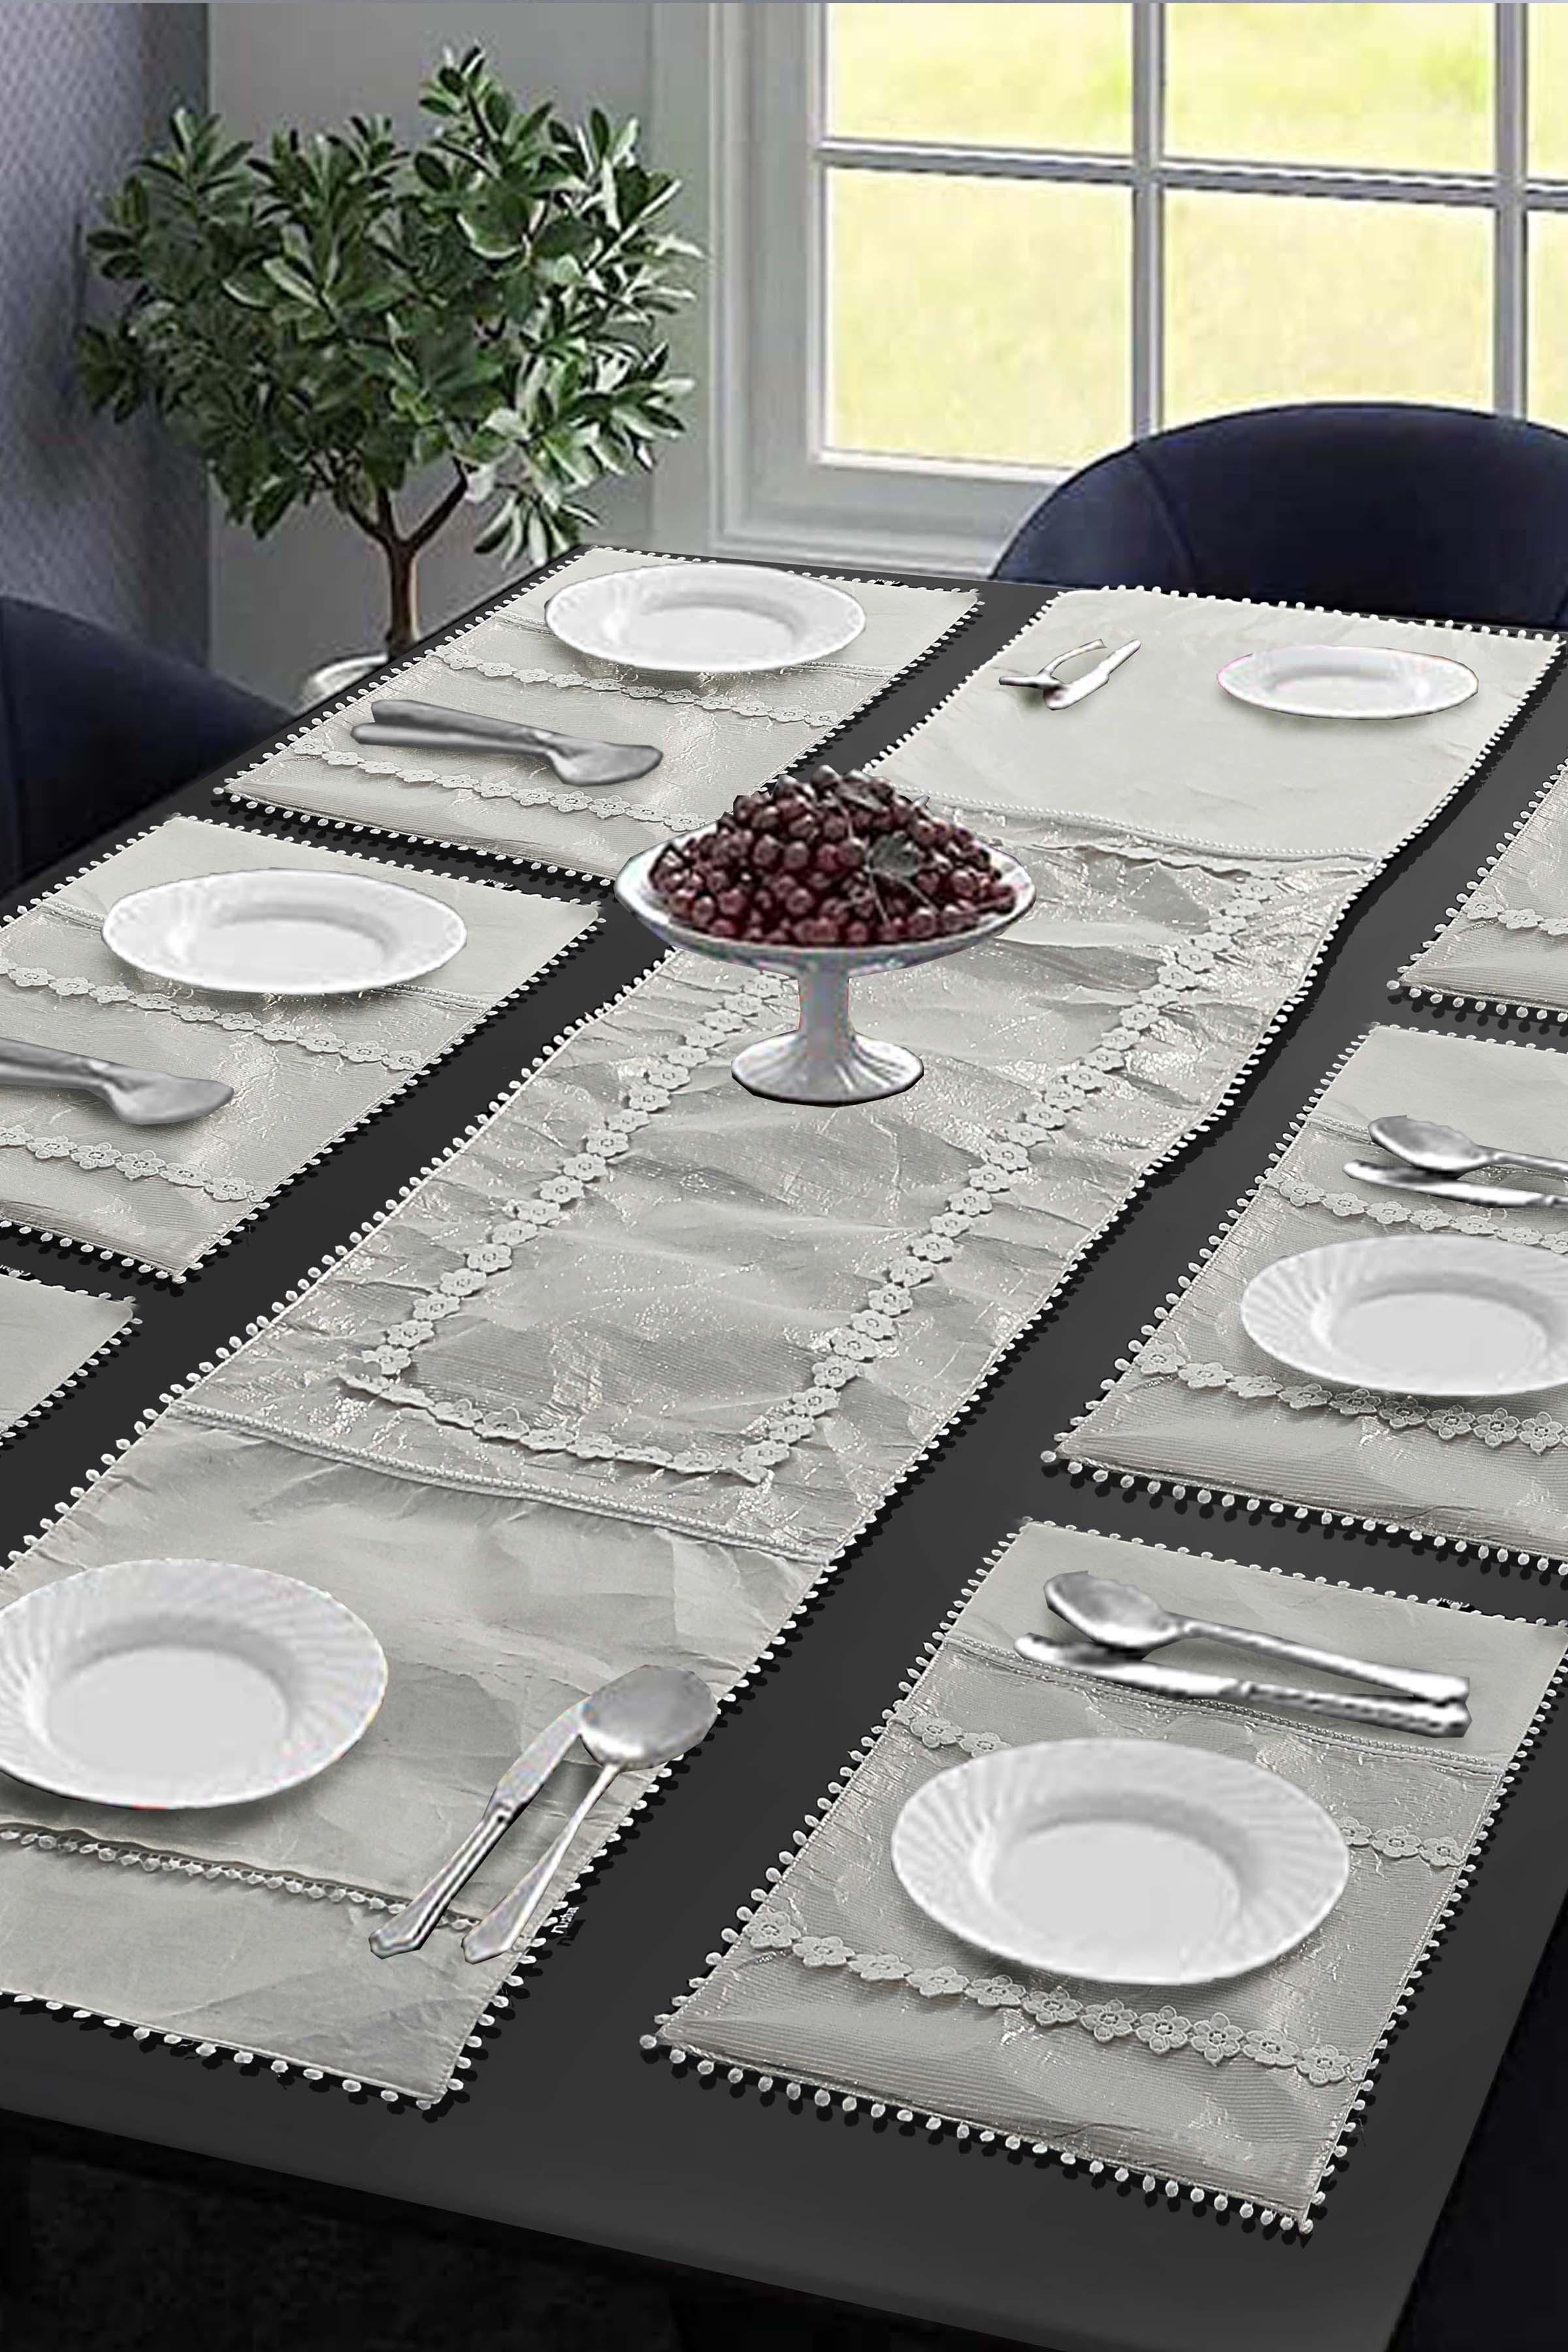 MOTHER OF PEARL TABLE RUNNER SET 5 PIECE, UNDEFINED